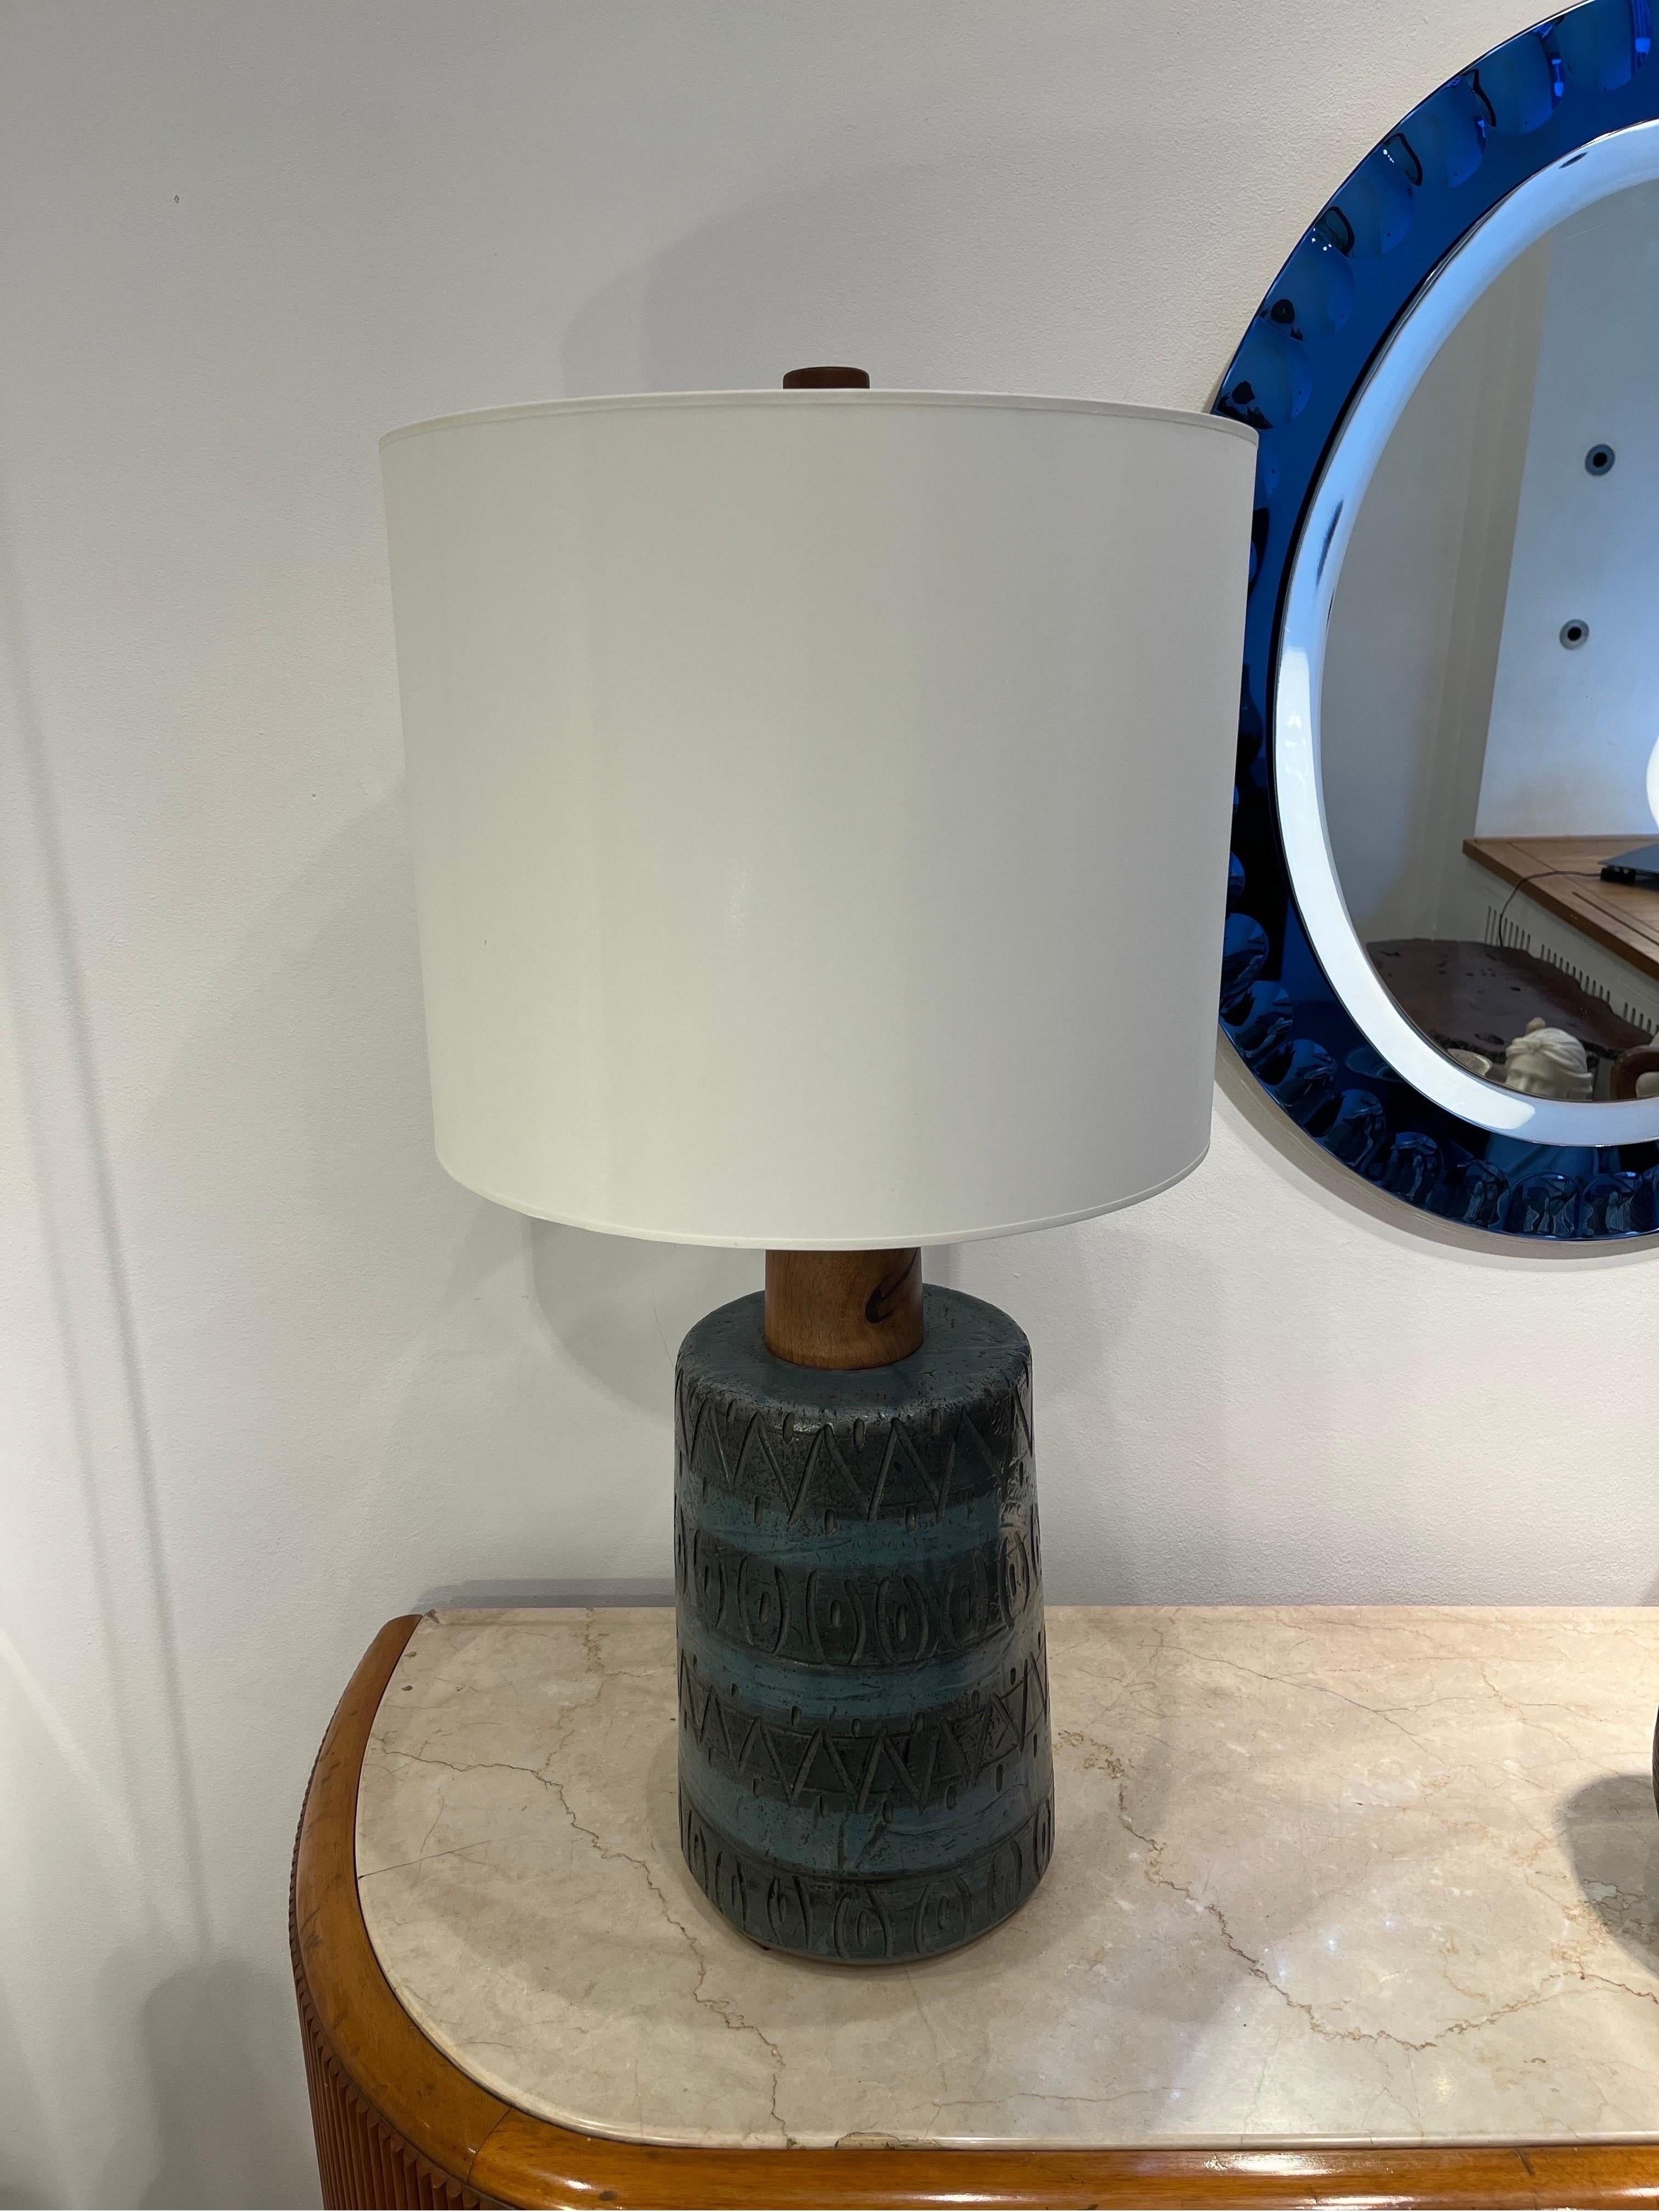 Ceramic table lamp created by Gordon & Jane Marta in the 1960s and produced in the Marshall Studios, Indianapolis. Decorated with a geometric abstract pattern colored in dark and lighter blue. The use of walnut for the shade holder is typical of